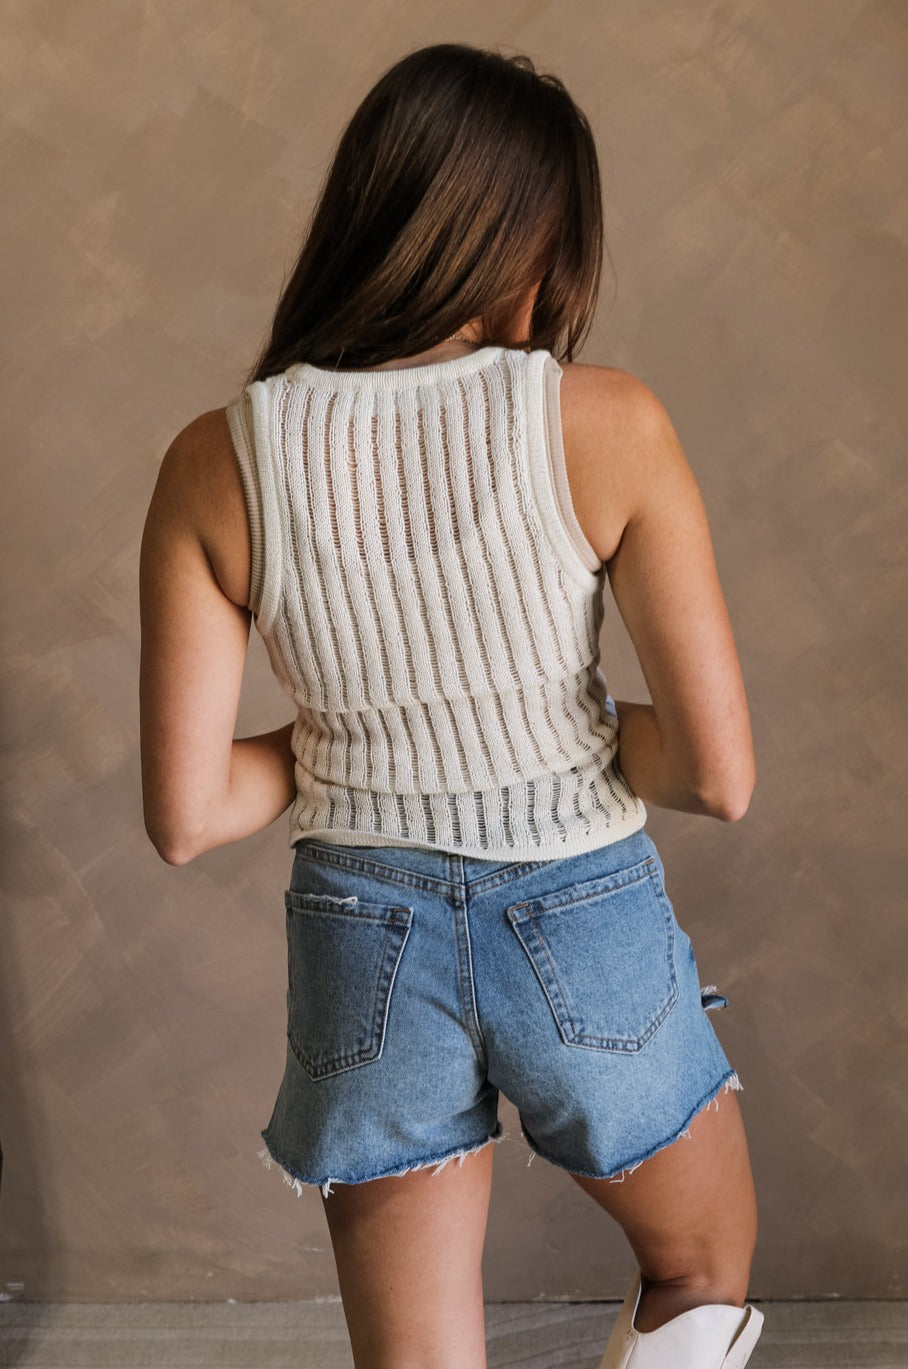 Back view of female model wearing the Bria Cream Knit Sleeveless Tank which features Cream Knit Fabric, Round Neckline and Sleeveless